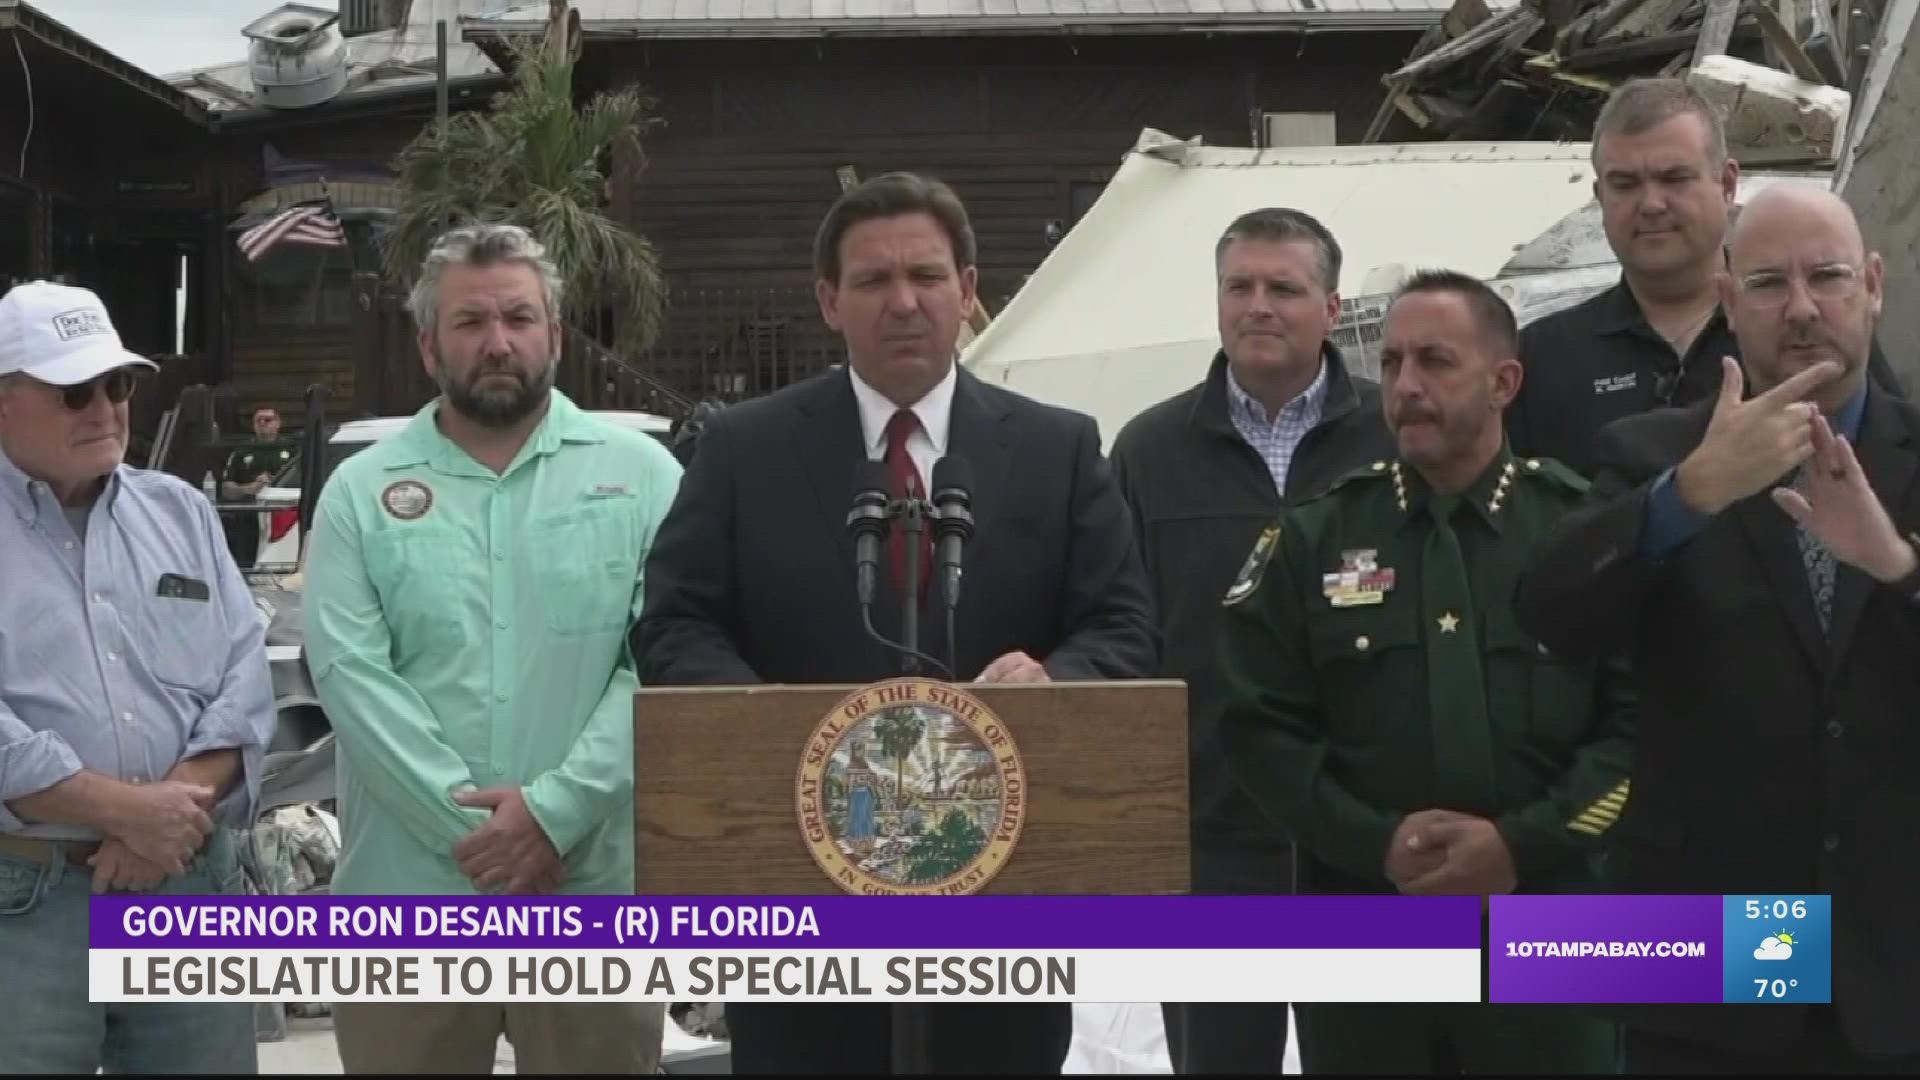 DeSantis says the extension will allow the legislature to convene for a special session to give rebates to property owners.